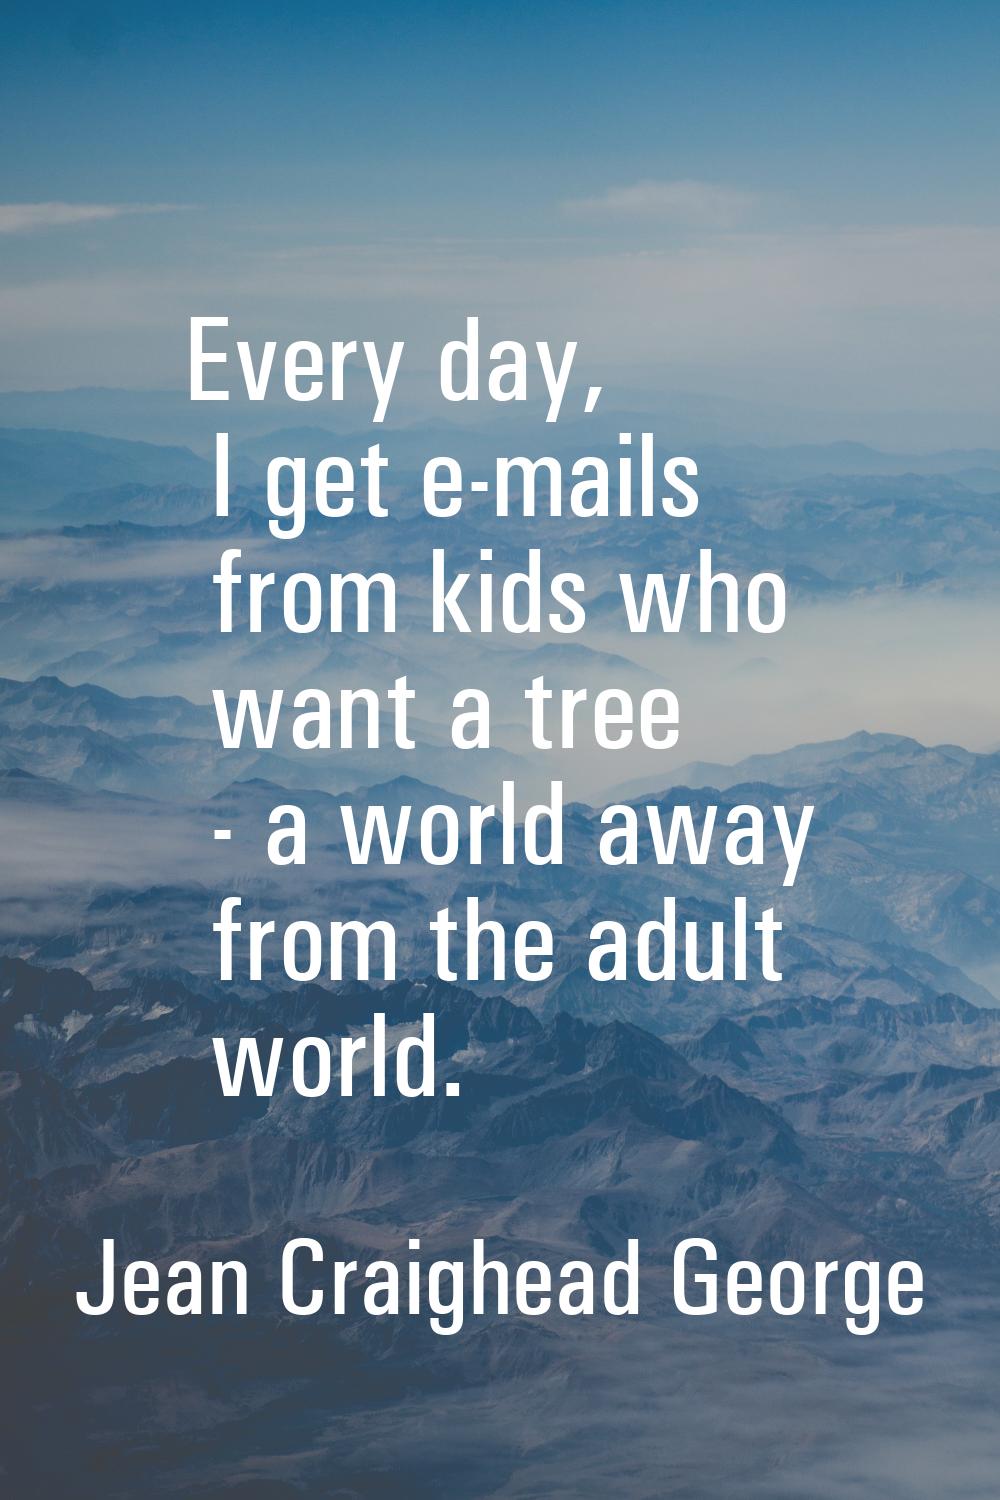 Every day, I get e-mails from kids who want a tree - a world away from the adult world.